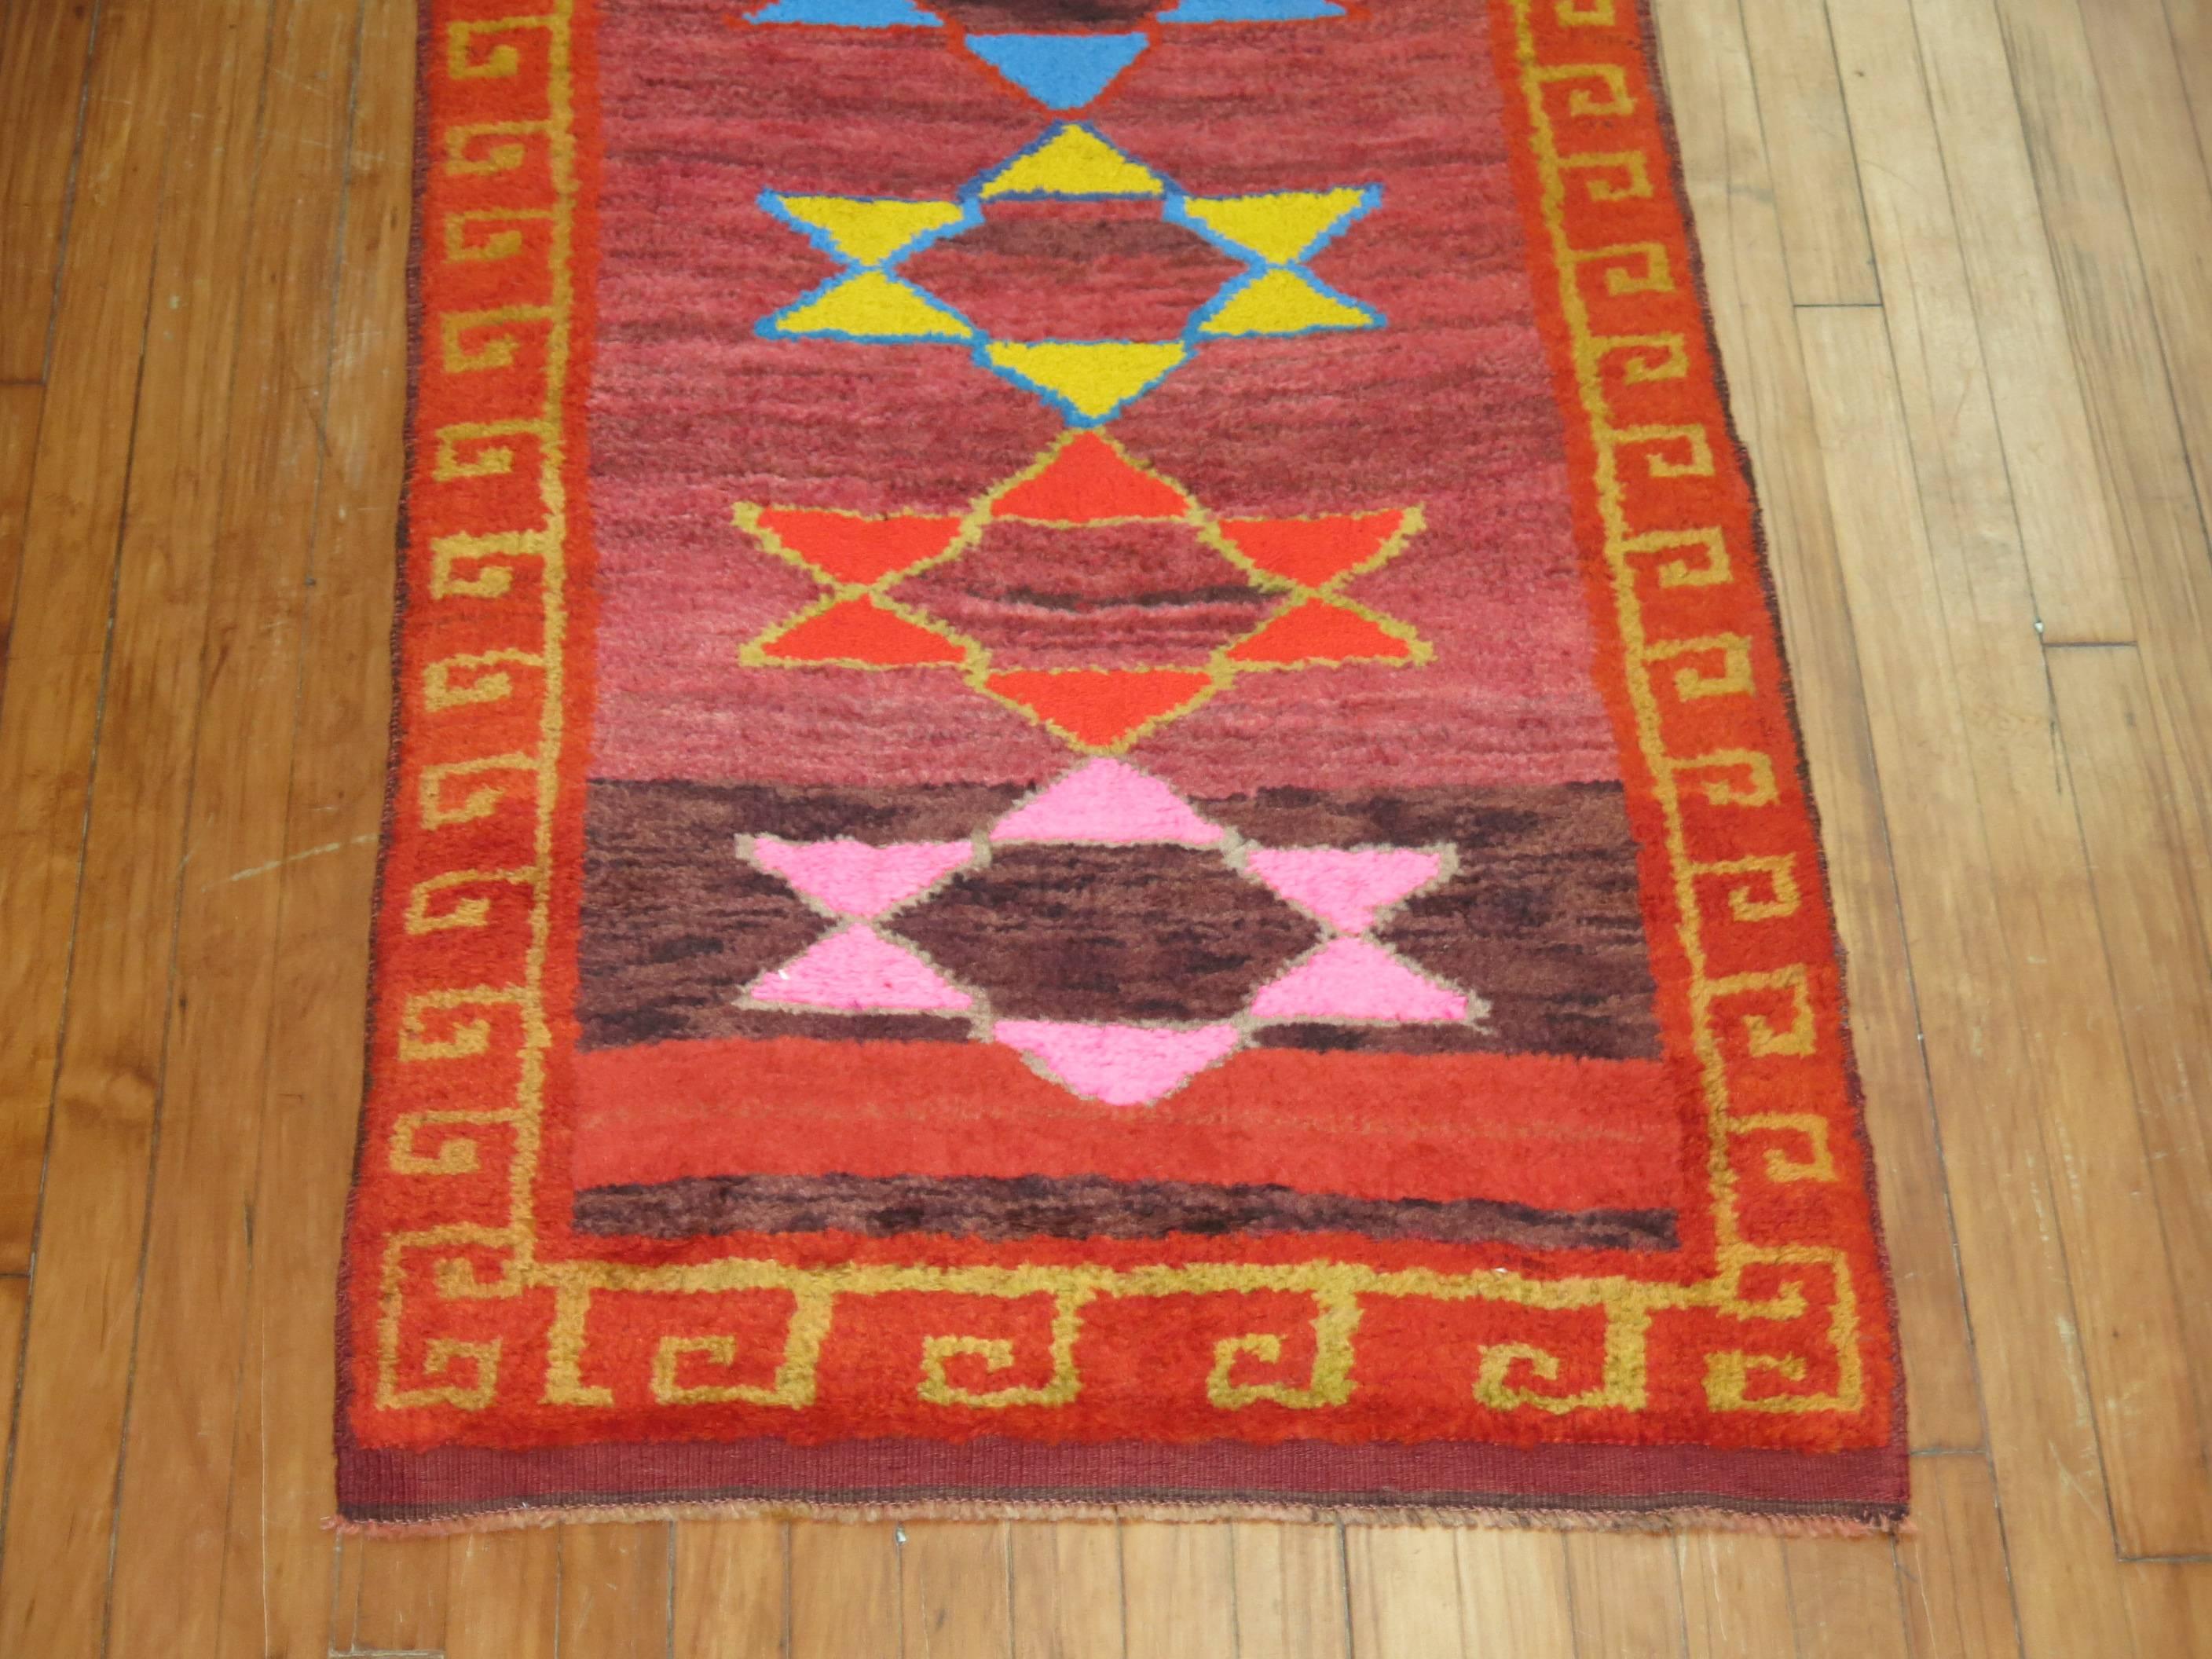 Mid-20th century Turkish runner with a bright all-over star motif. So many wild colors predominantly in bright pink, lavender, electric blue, coral and red.

Measures: 2'9